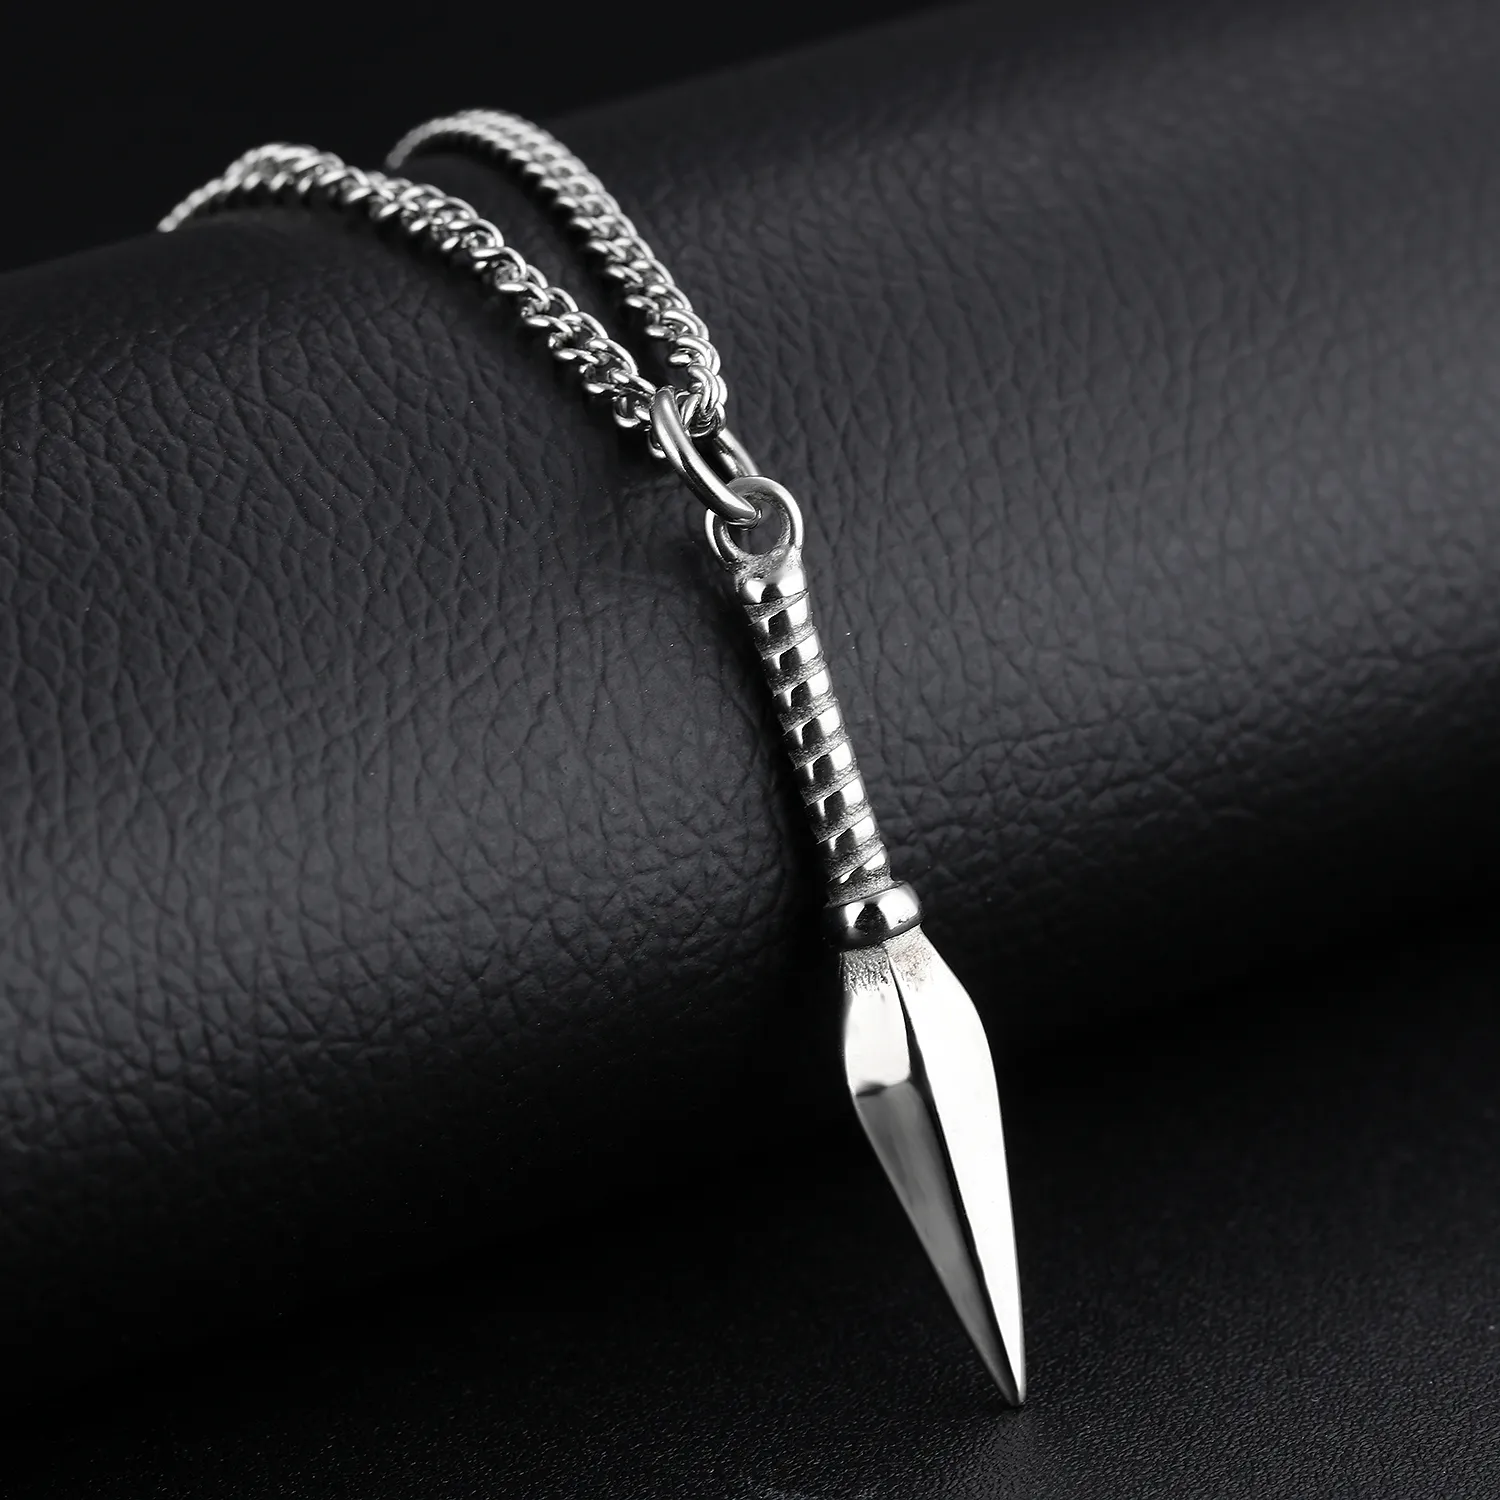 48mm Viking Spearhead Necklace in Stainless Steel - Silver, Gold, Black